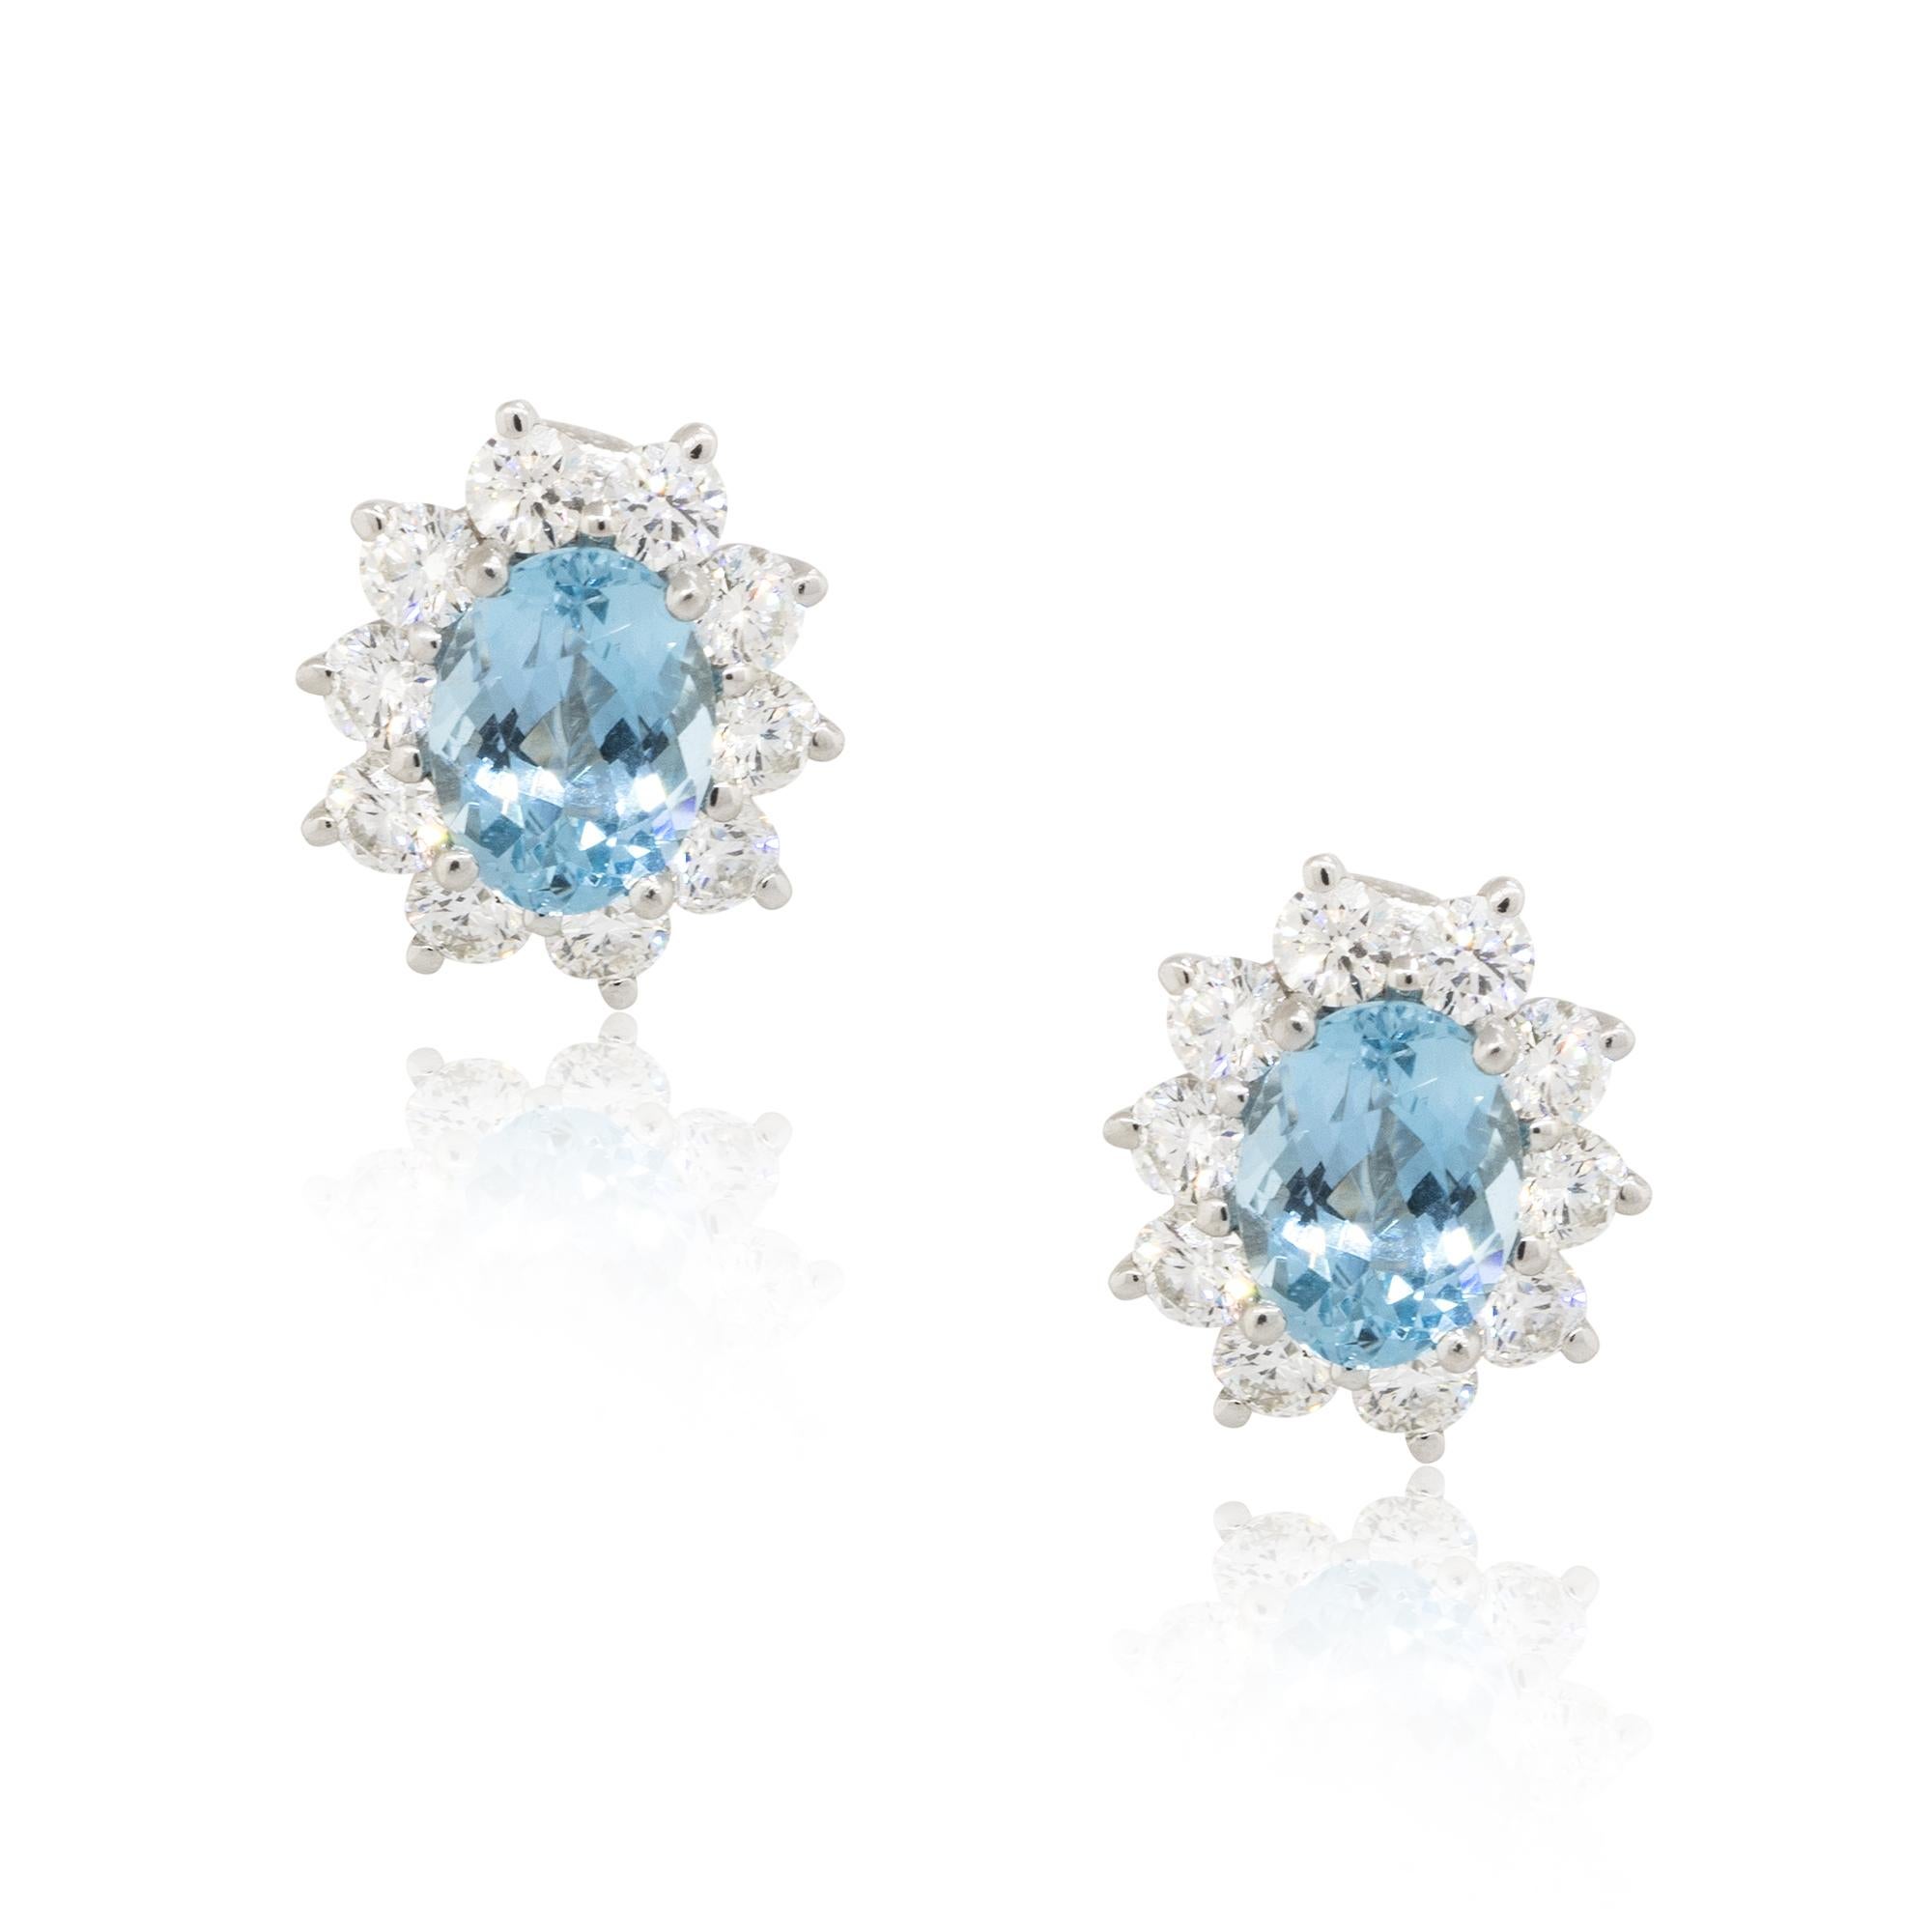 Brand: Tiffany & Co.
Material: Platinum
Diamond Details: Approx. 2.21ctw of round cut Diamonds. Diamonds are F/G in color and VVS-VS in clarity
Gemstone Details: Oval cut Aquamarine gemstones
Earring Measurements: 11.60mm x 13mm x 16.45mm
Total